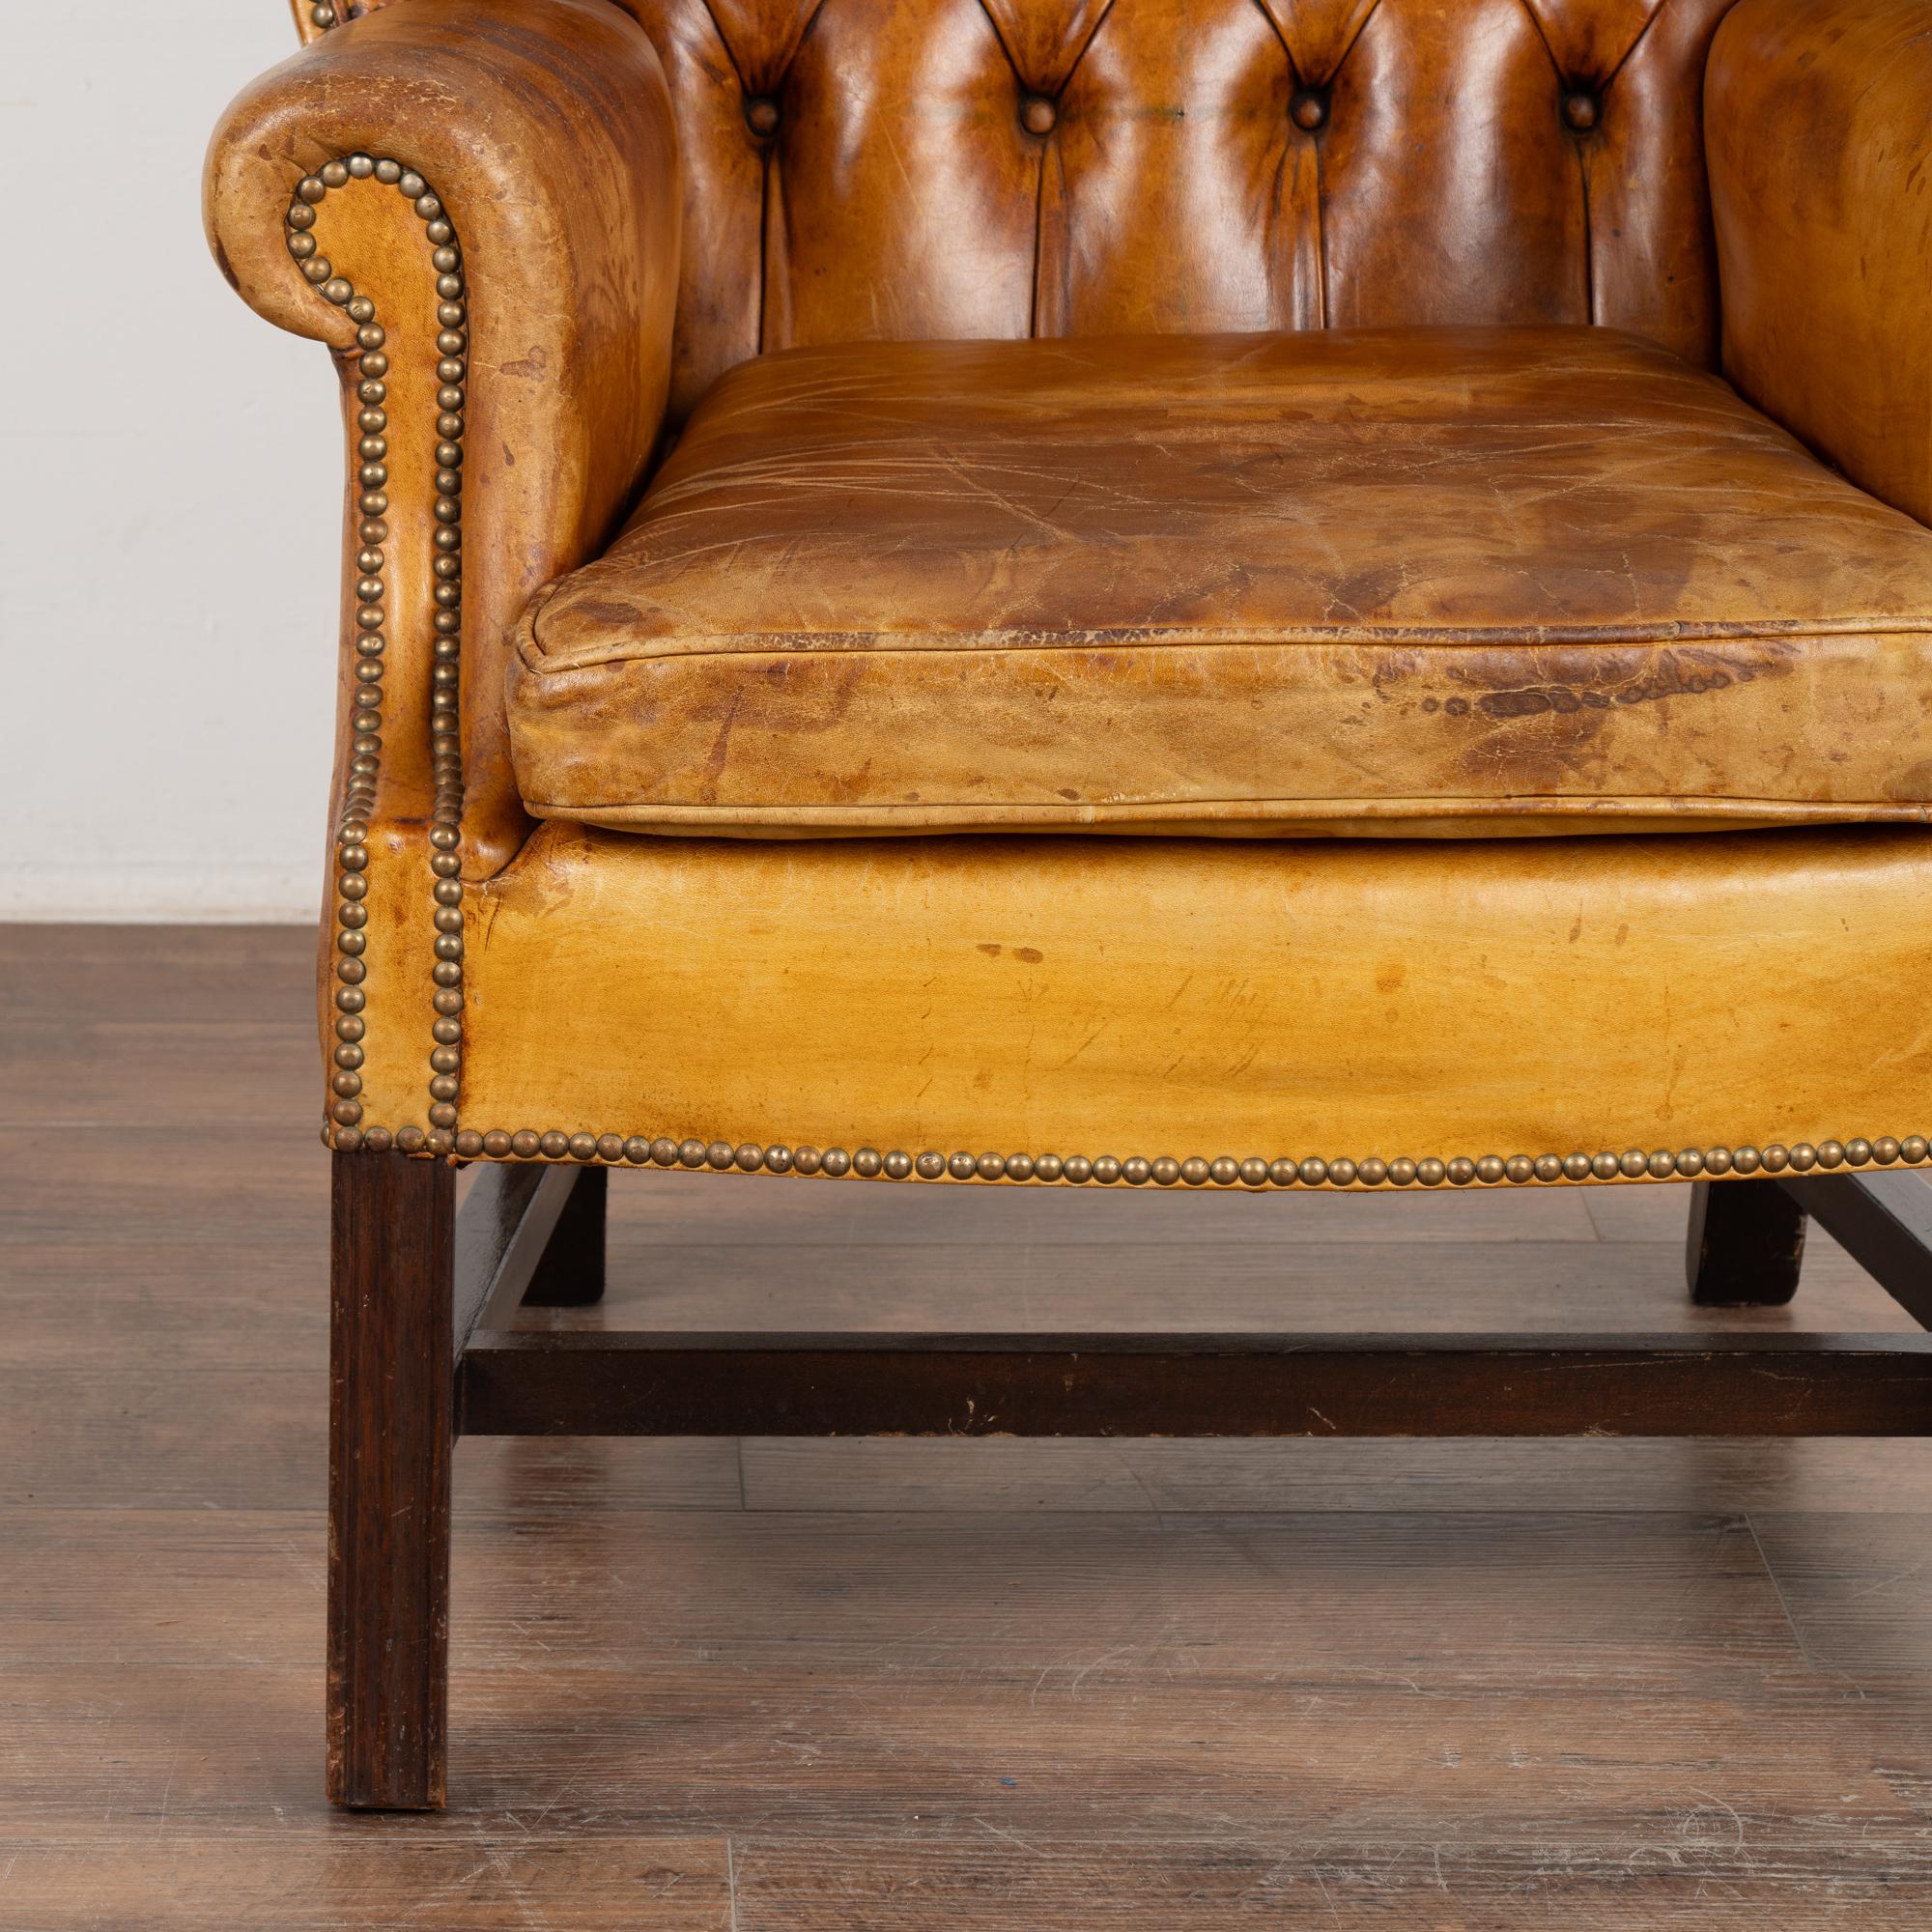 Vintage Brown Leather Wingback Chesterfield Arm Chair, England circa 1940 For Sale 4